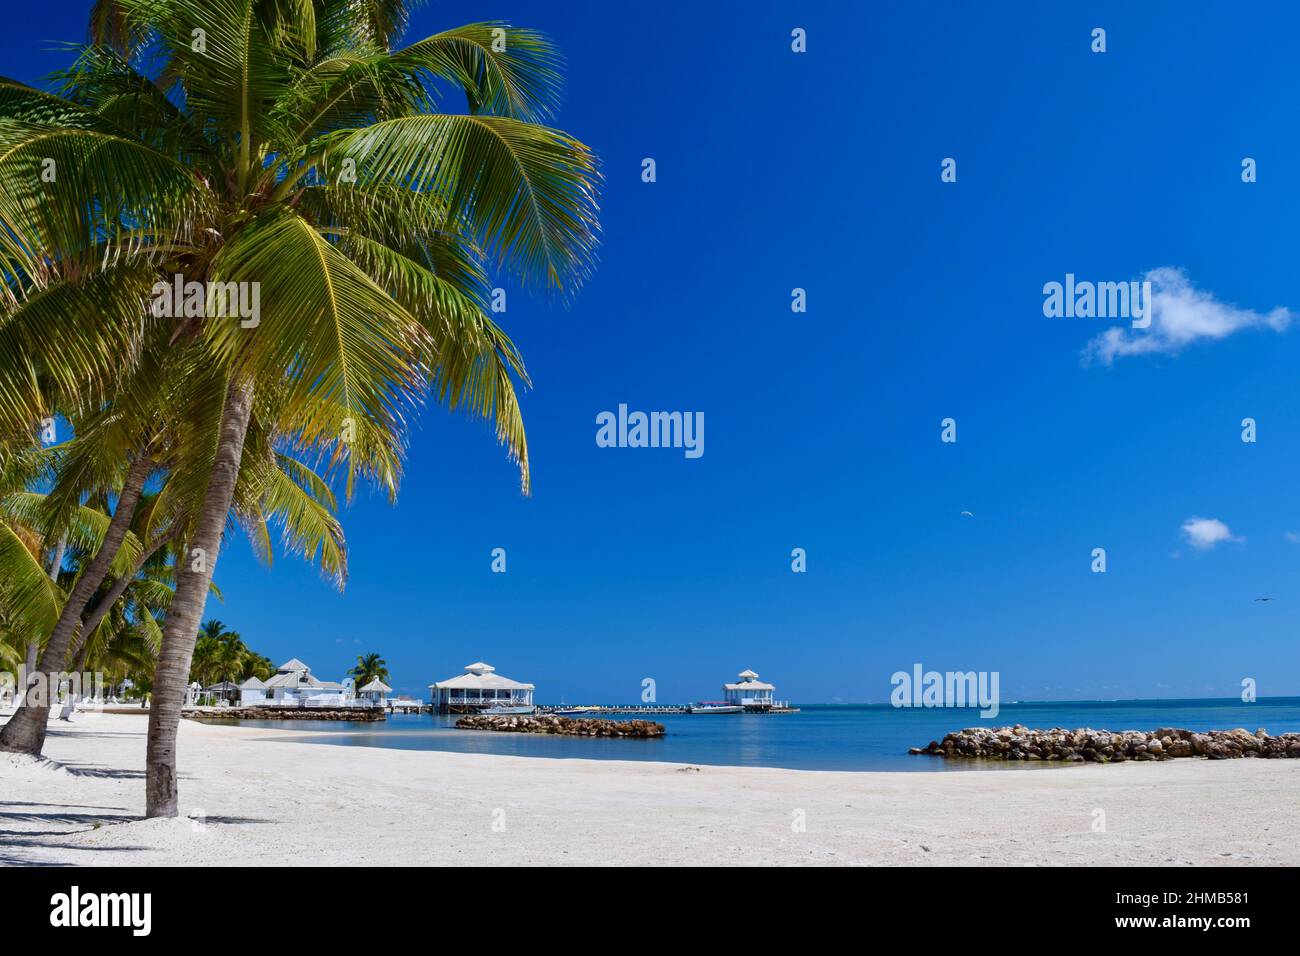 A gorgeous day at the beach with 0 people, palm trees, white sand, a bay, pier, and buildings over the water on San Pedro, Belize. Stock Photo